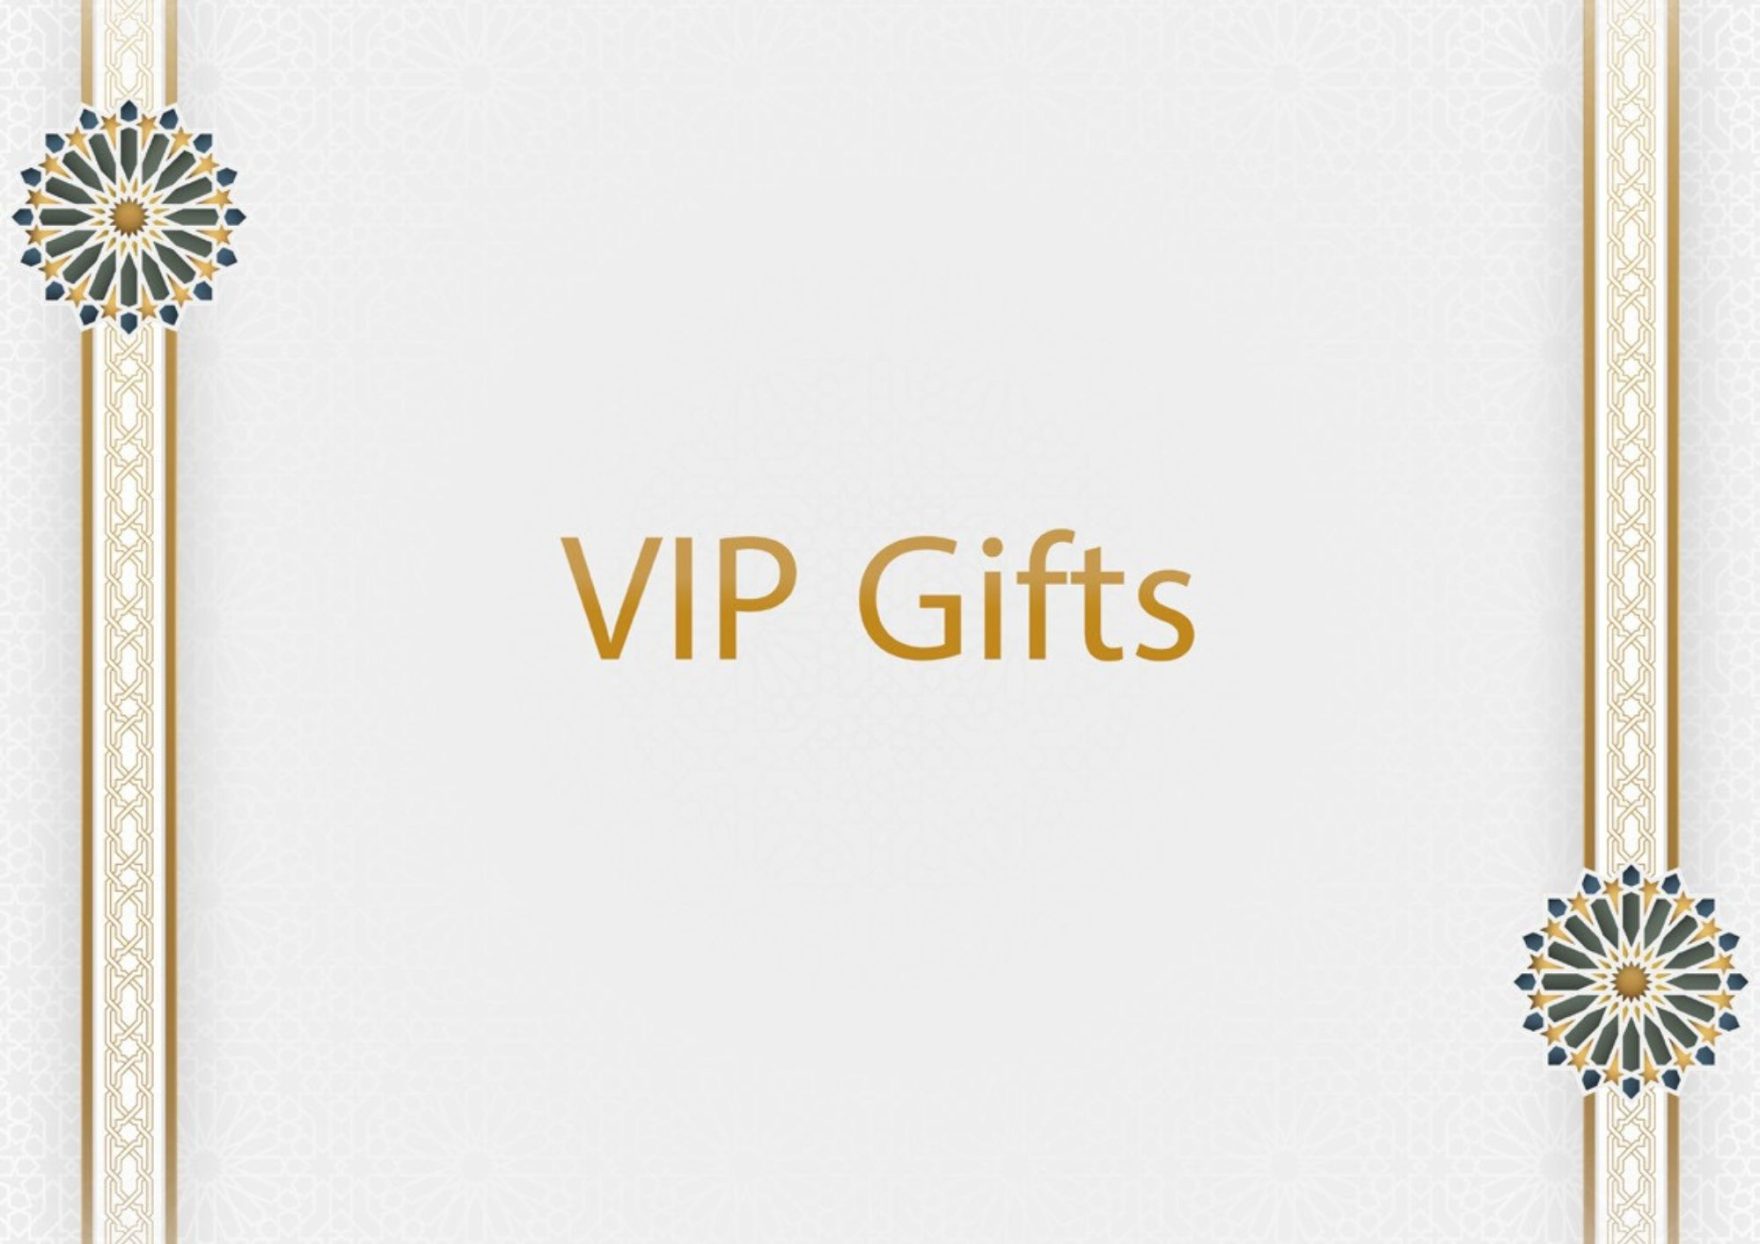 VIP Gifts